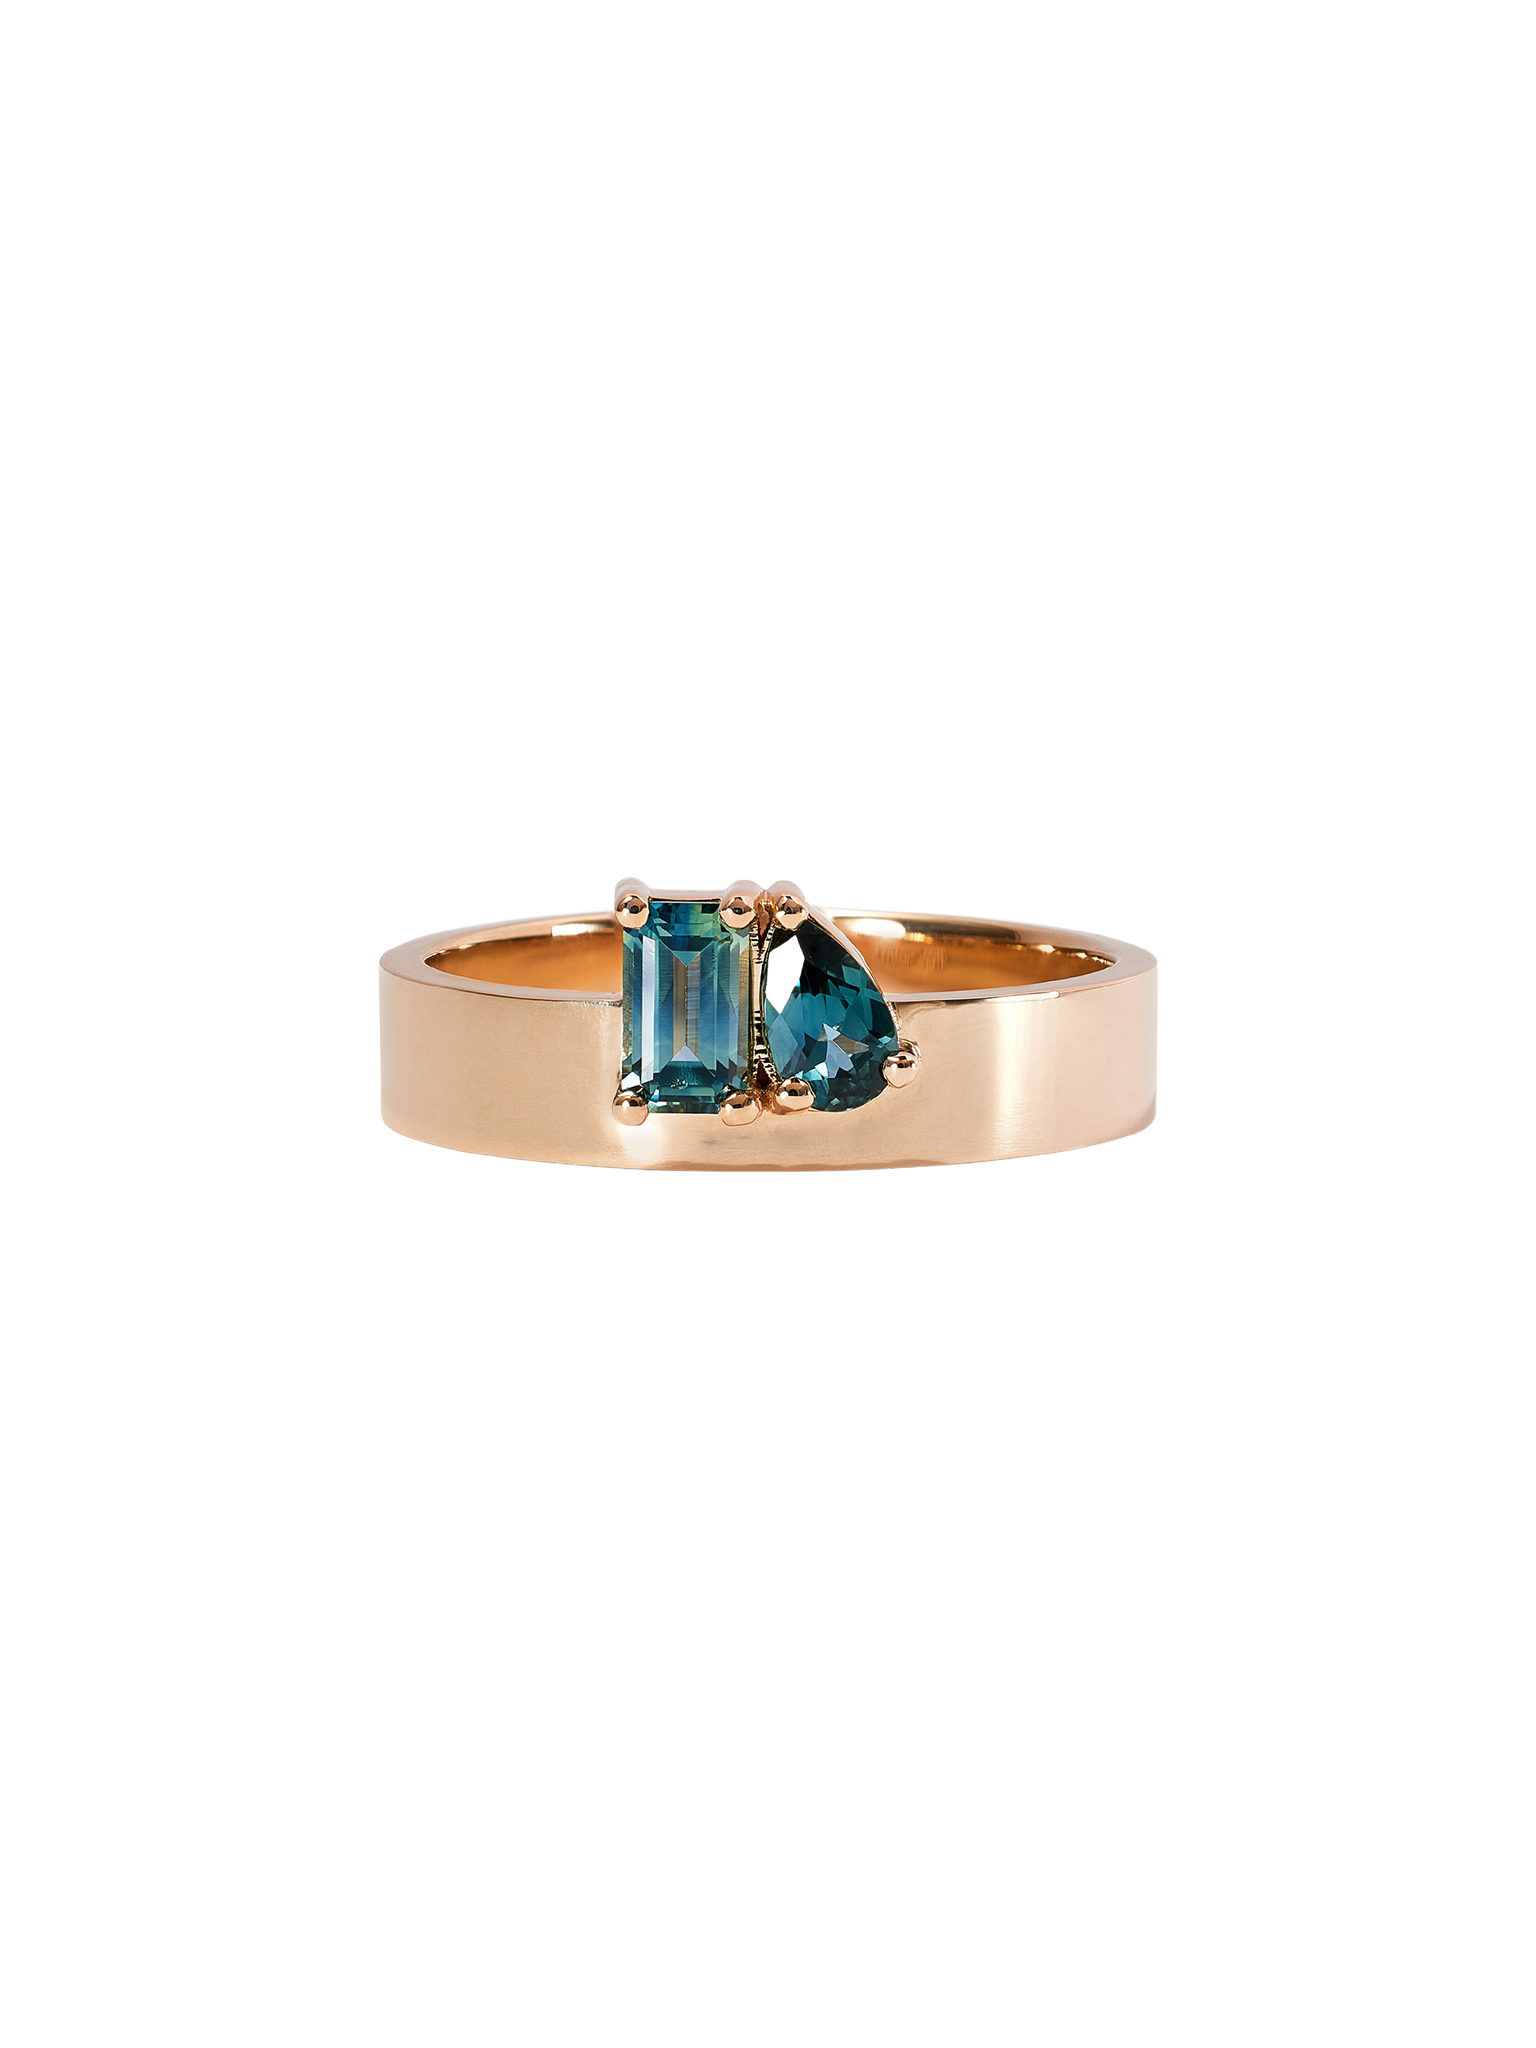 Emerald and pear cut sapphire bricolage ring